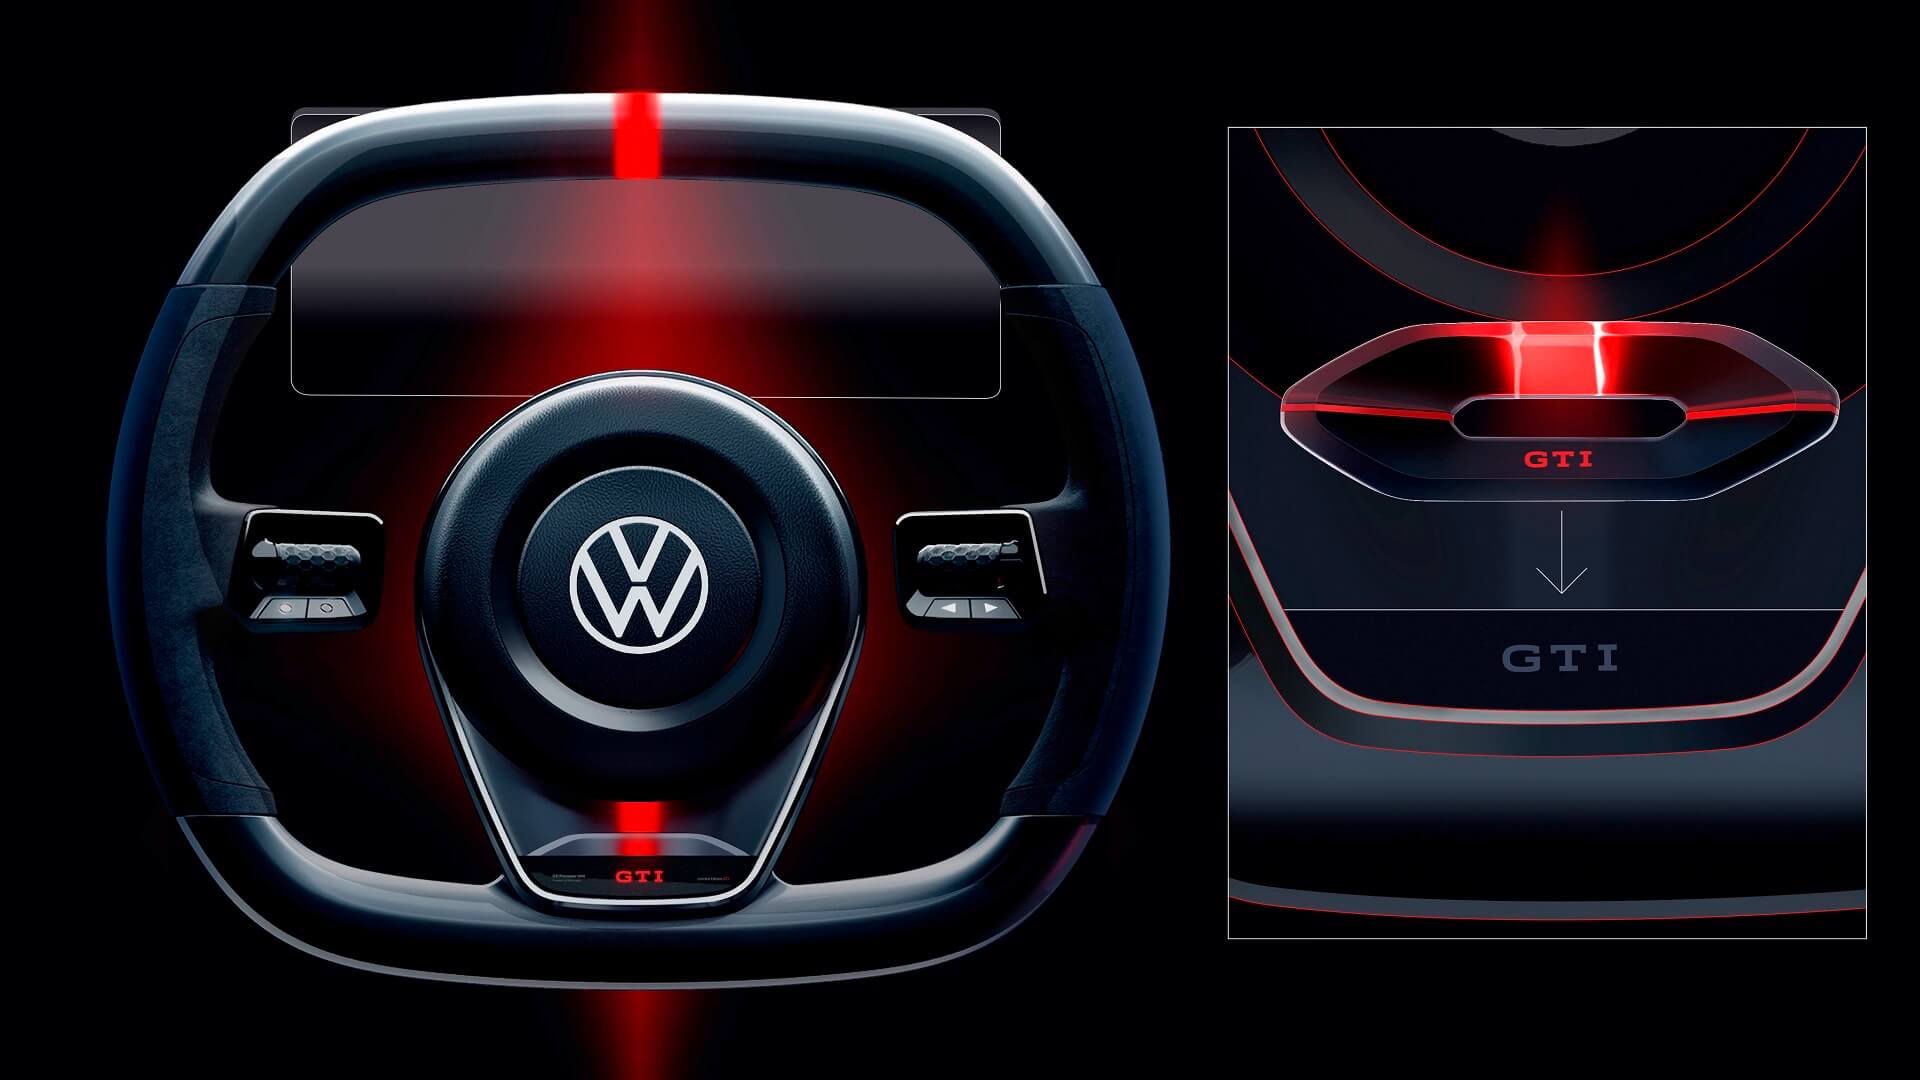 1693830758 368 Volkswagen ID introduced the GTI Concept electric model